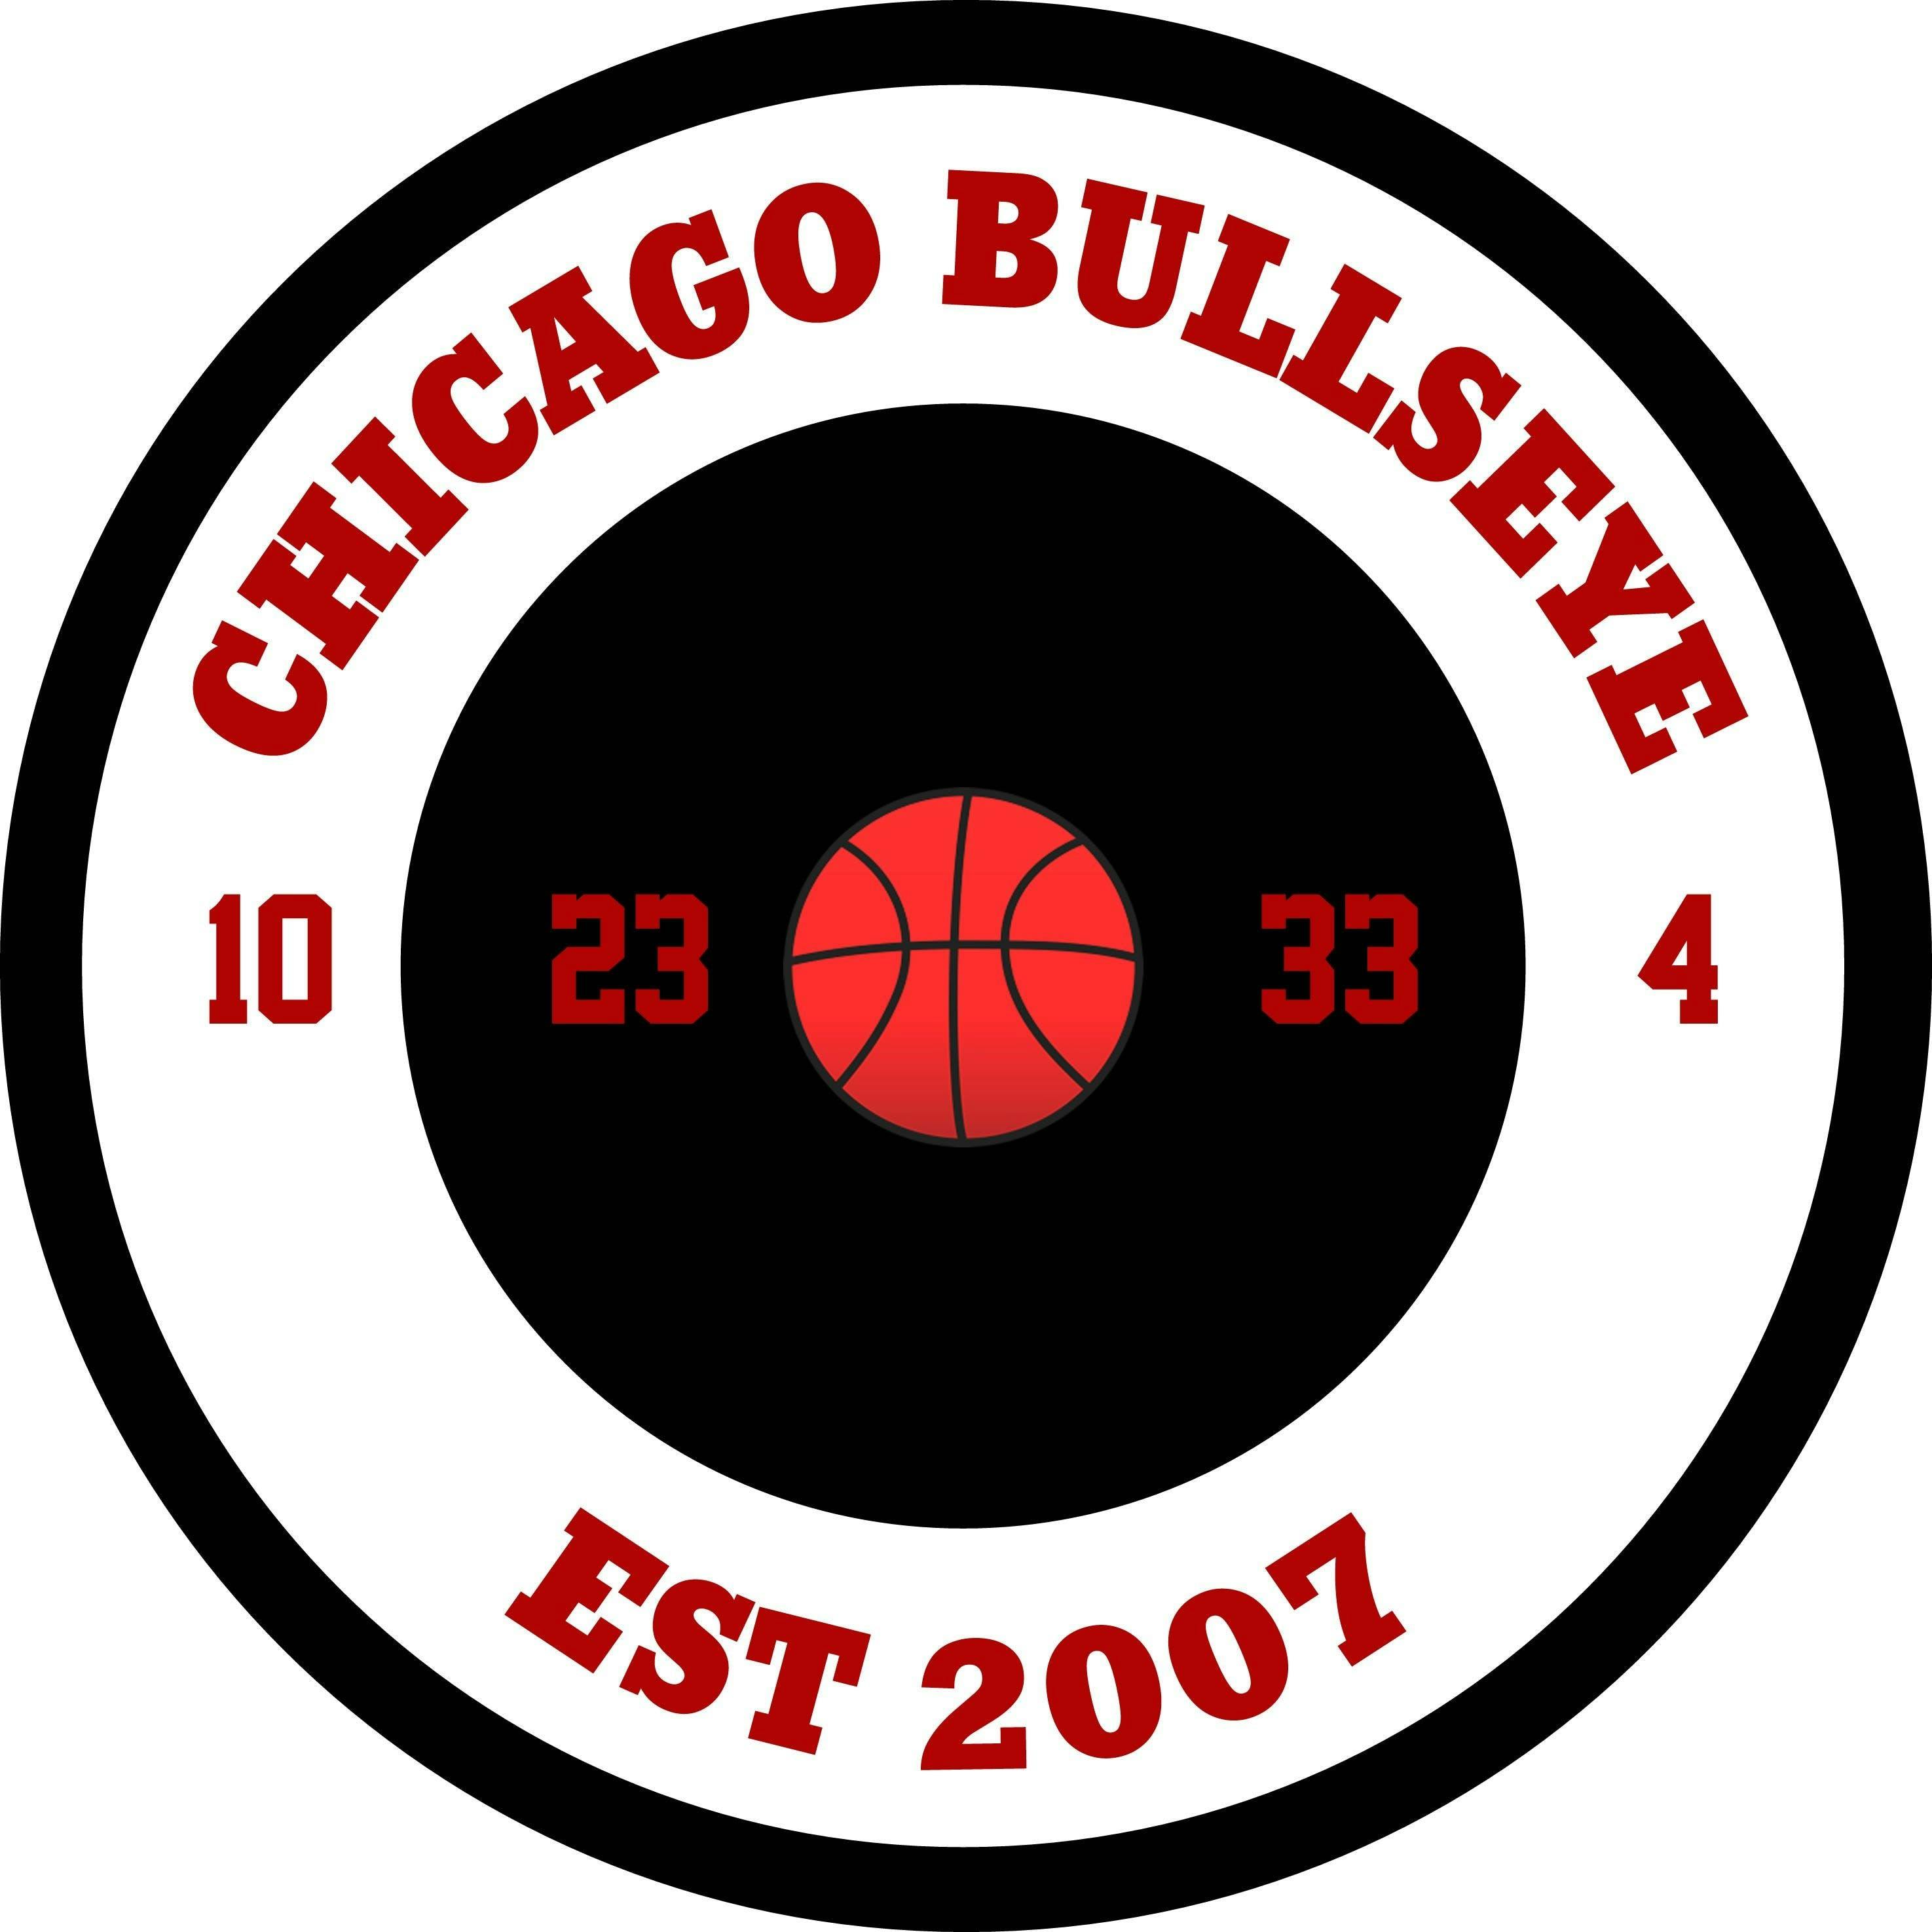 Chicago Bullseye 448 – The Darnell Mayberry Interview Part II